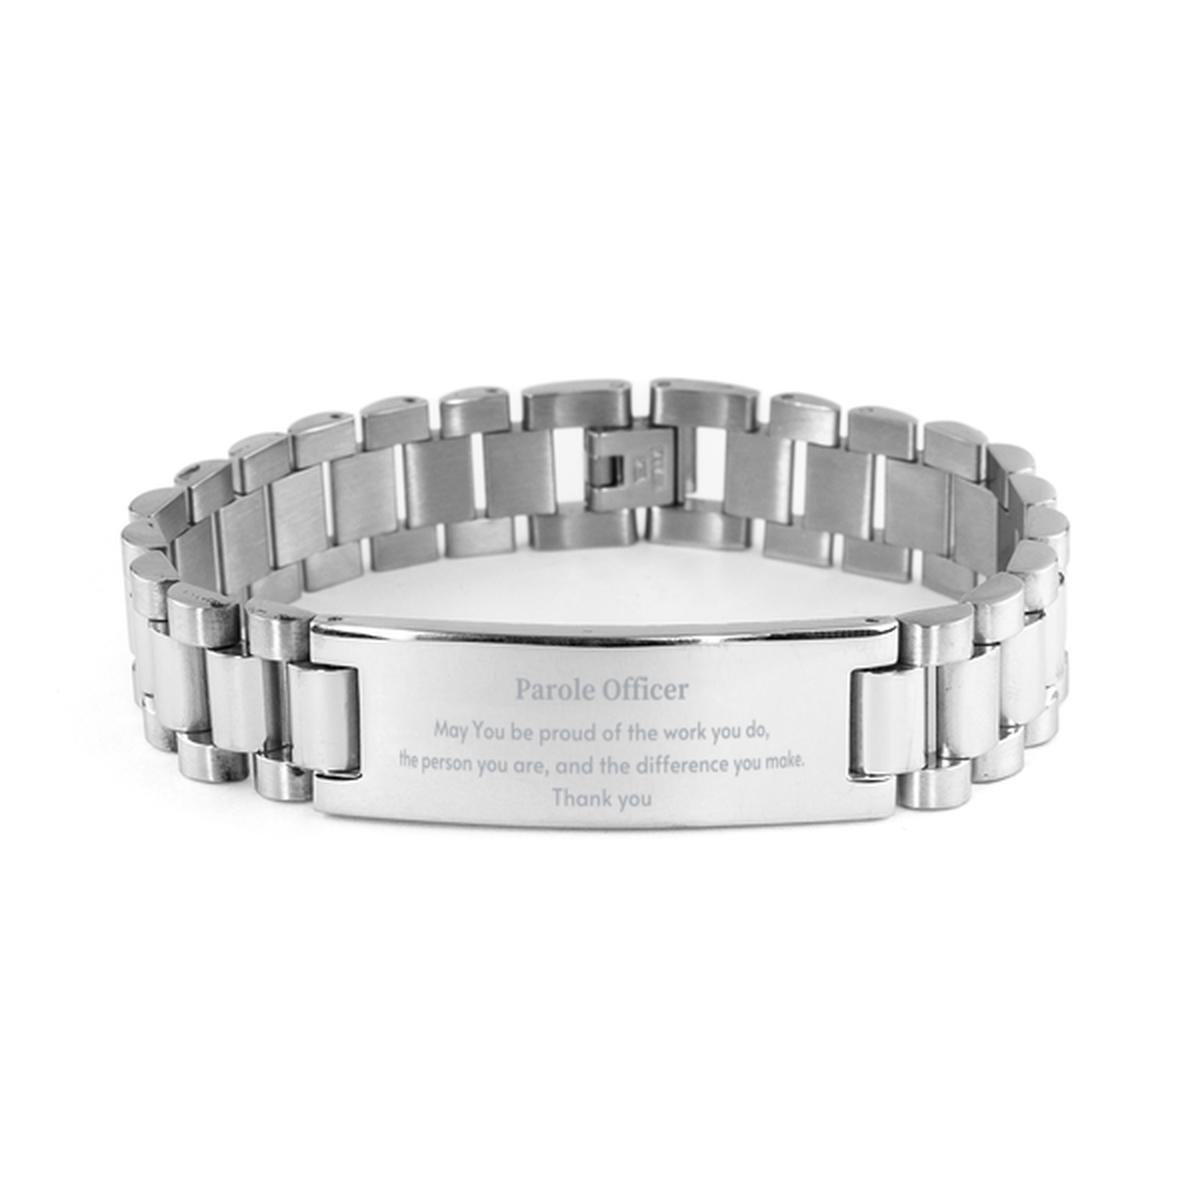 Heartwarming Ladder Stainless Steel Bracelet Retirement Coworkers Gifts for Parole Officer, Parole Officer May You be proud of the work you do, the person you are Gifts for Boss Men Women Friends